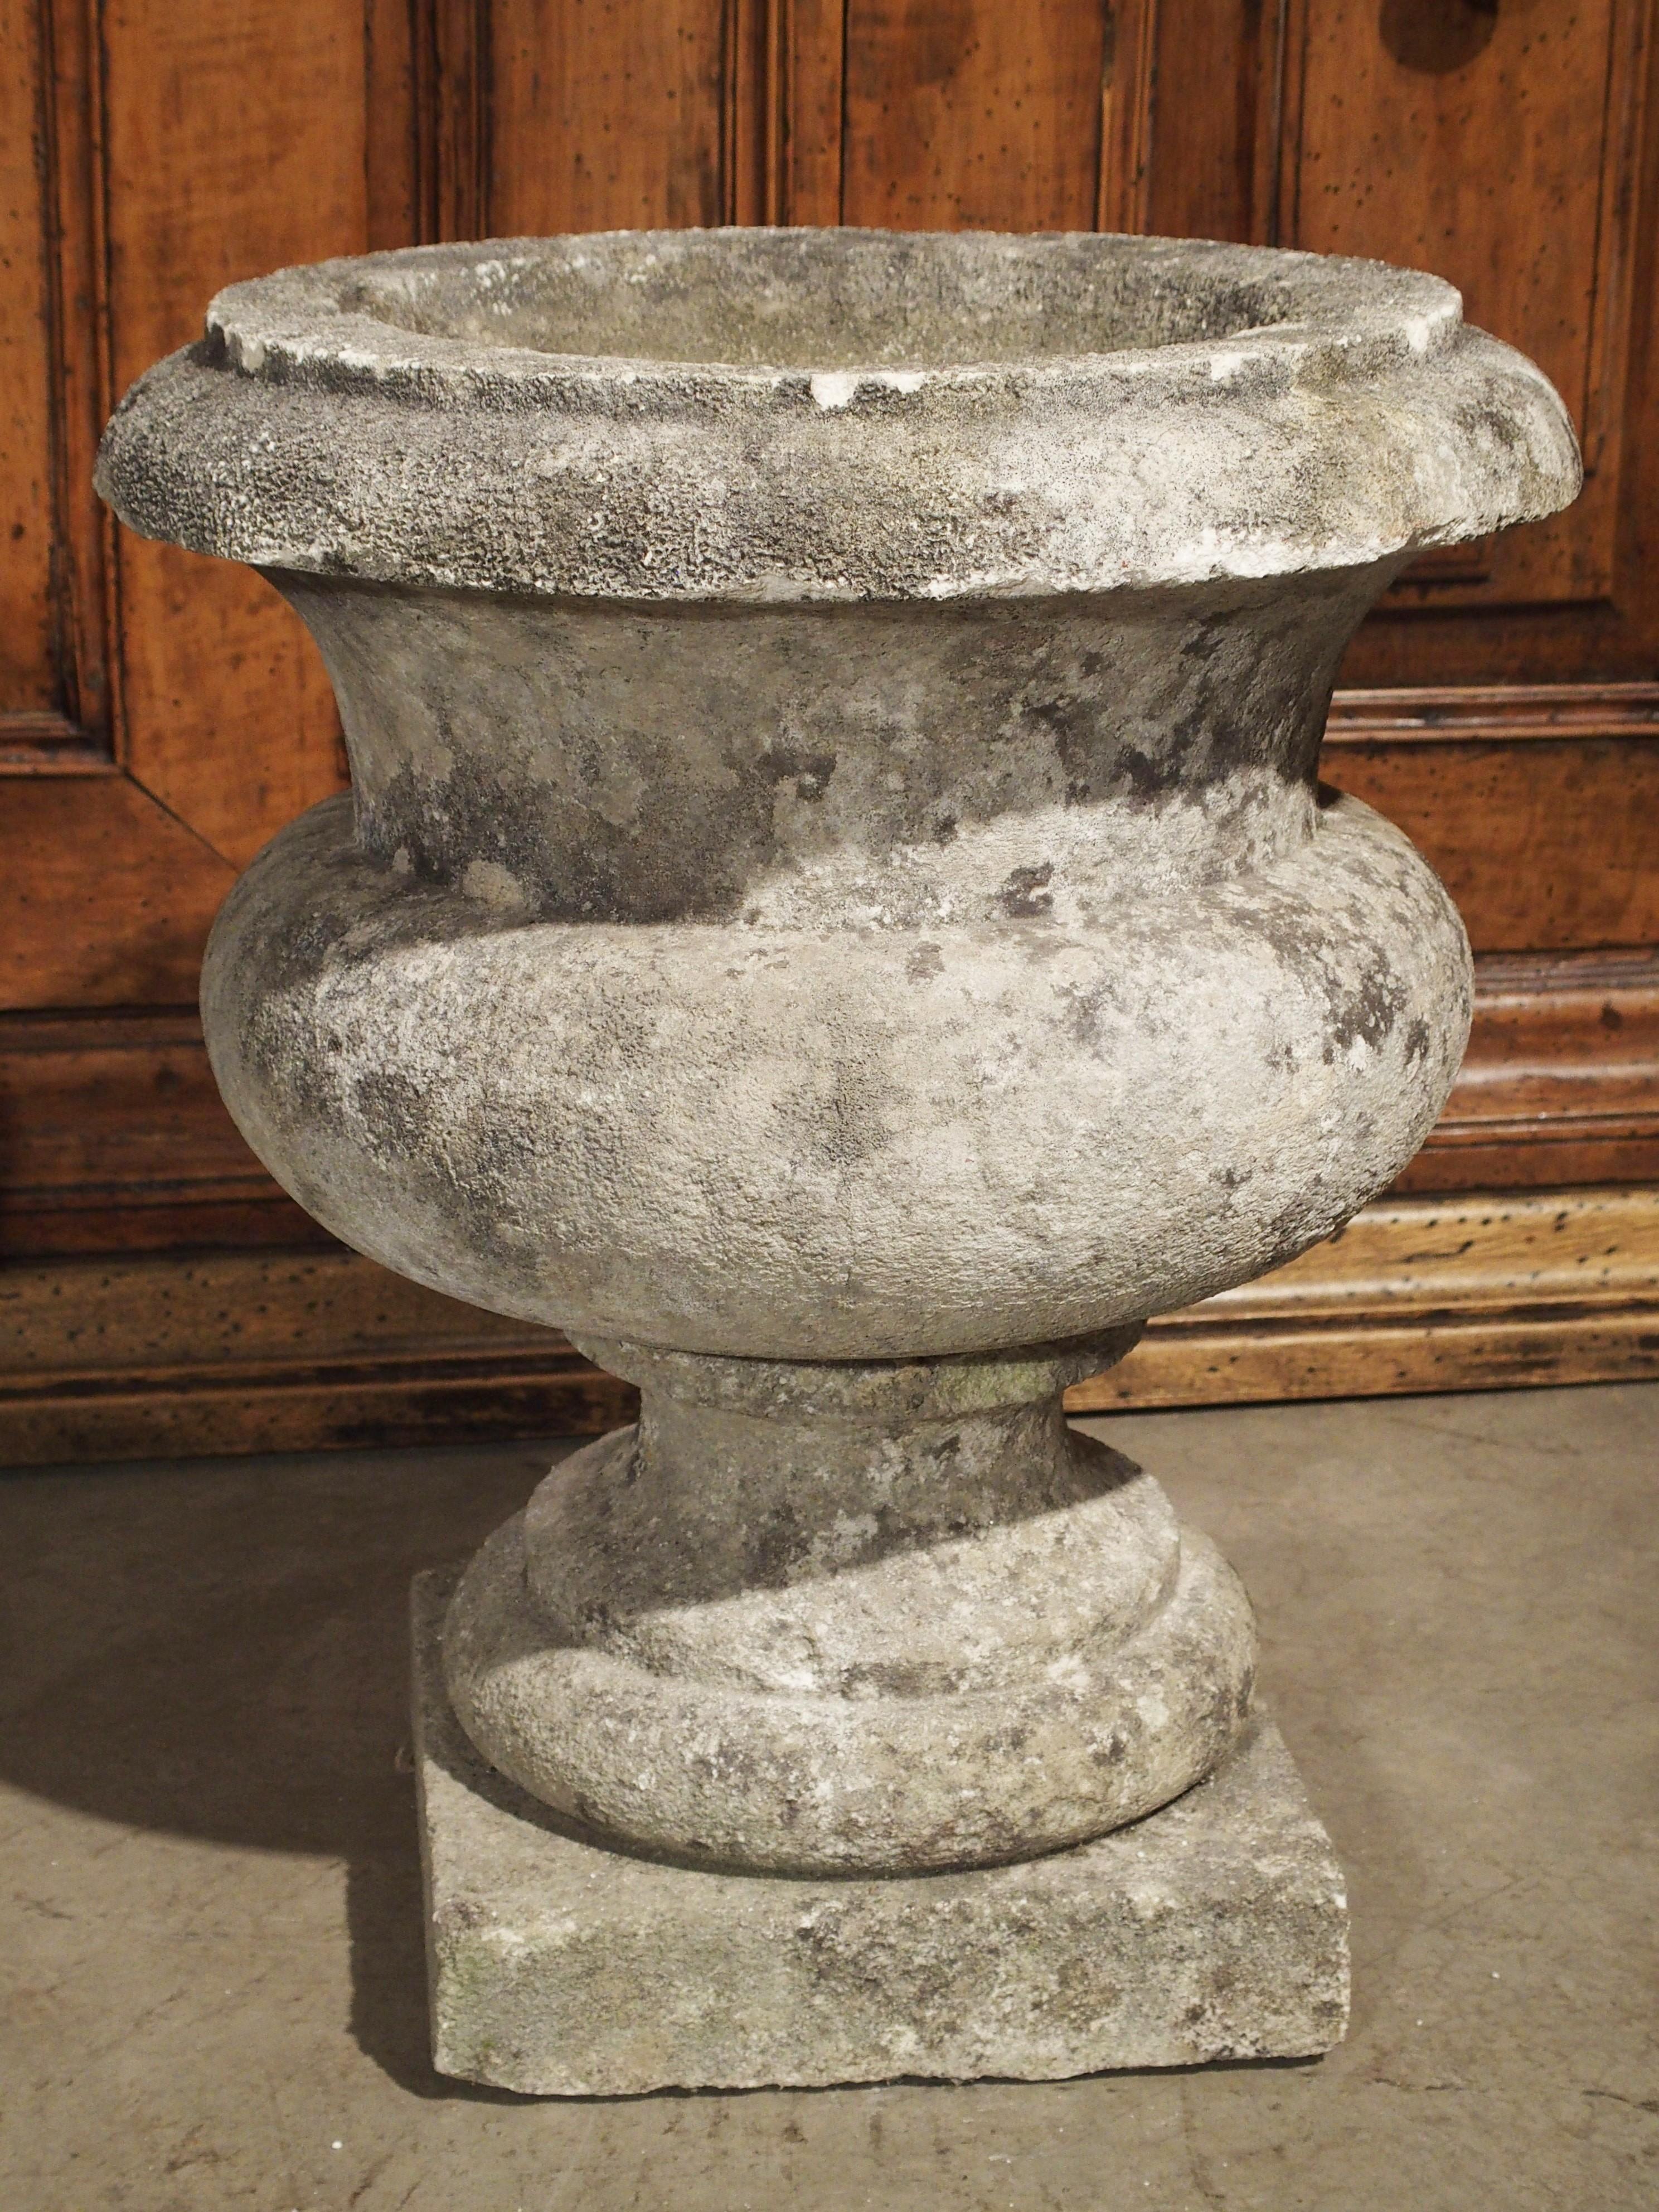 These classic antique carved stone garden vases are from a property in Bordeaux, France and date to the 19th Century (we have a second pair (finials) available, please inquire). They are indented at their waist with round bases which rest upon